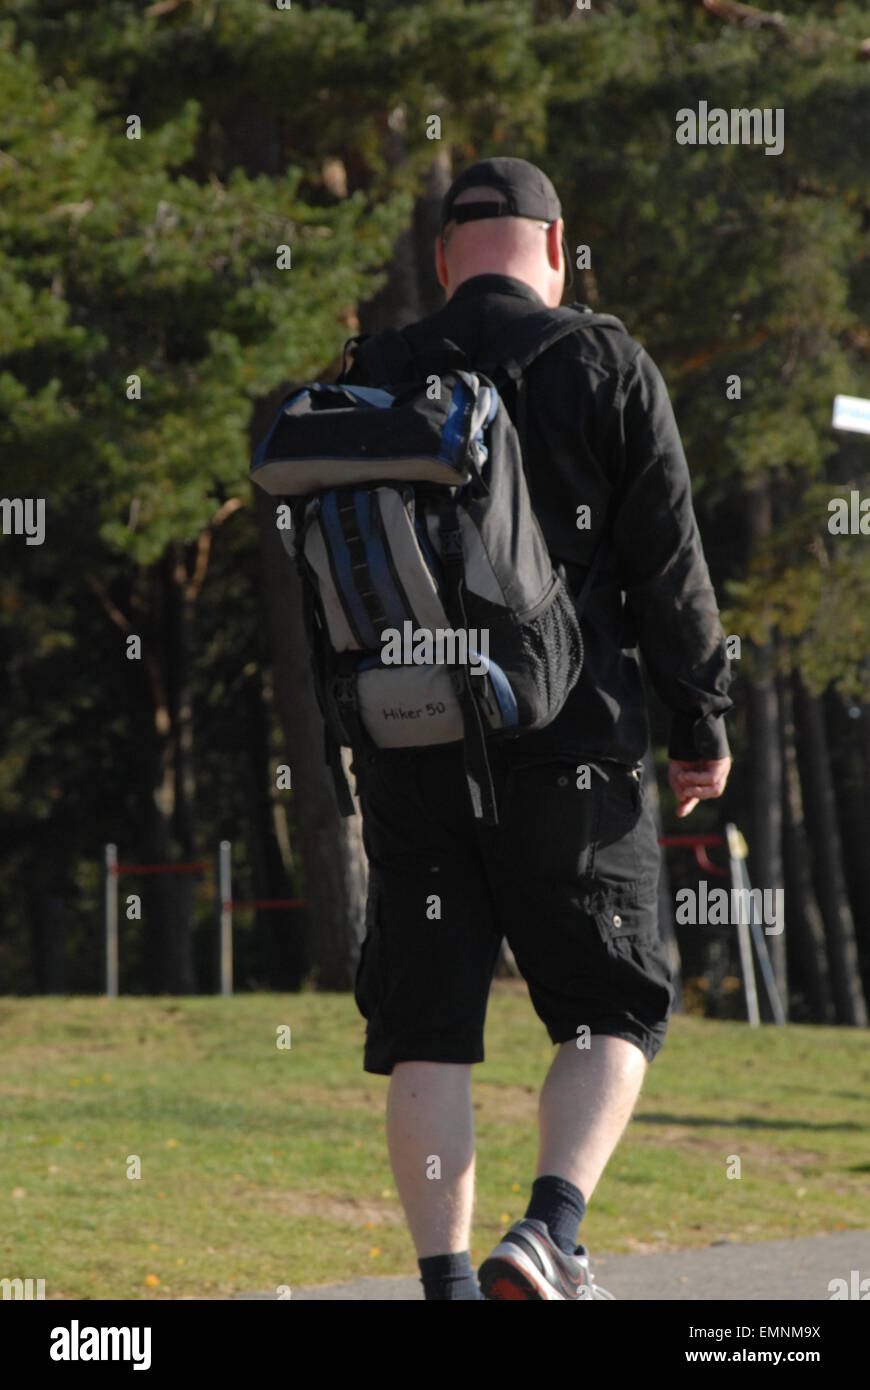 Man with backpack Stock Photo - Alamy